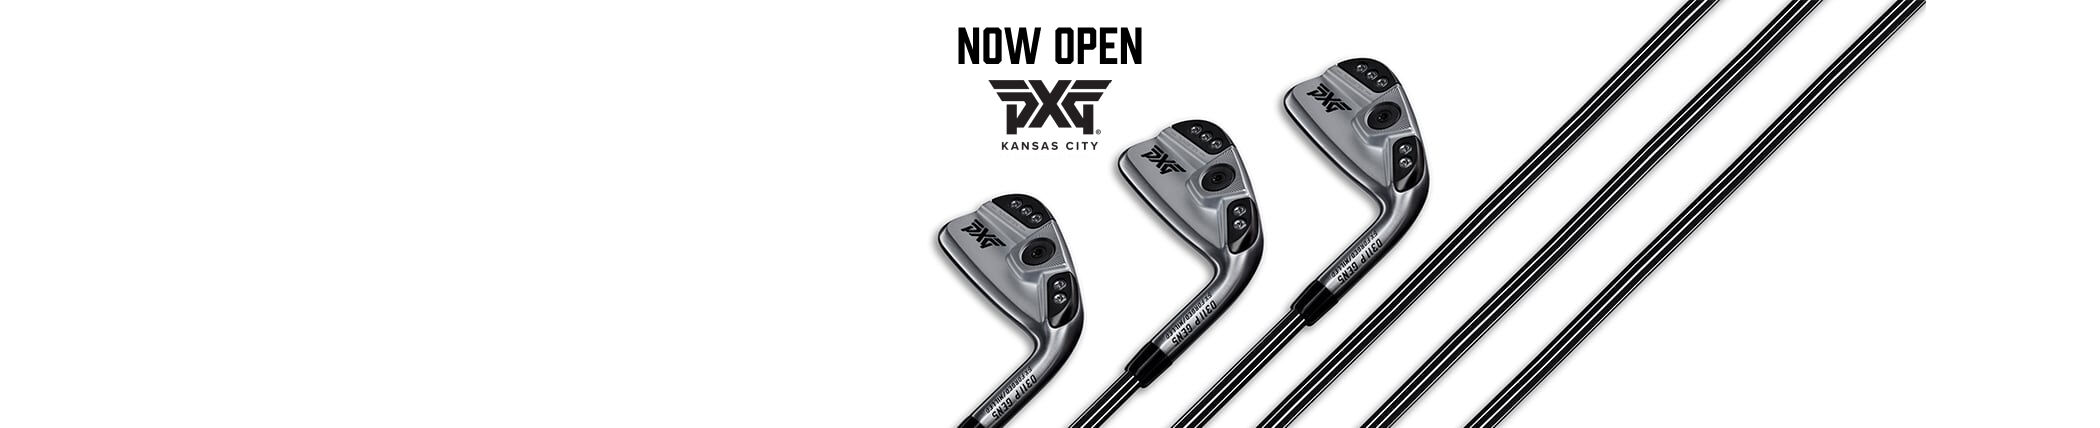 Opening Soon - PXG Westchester